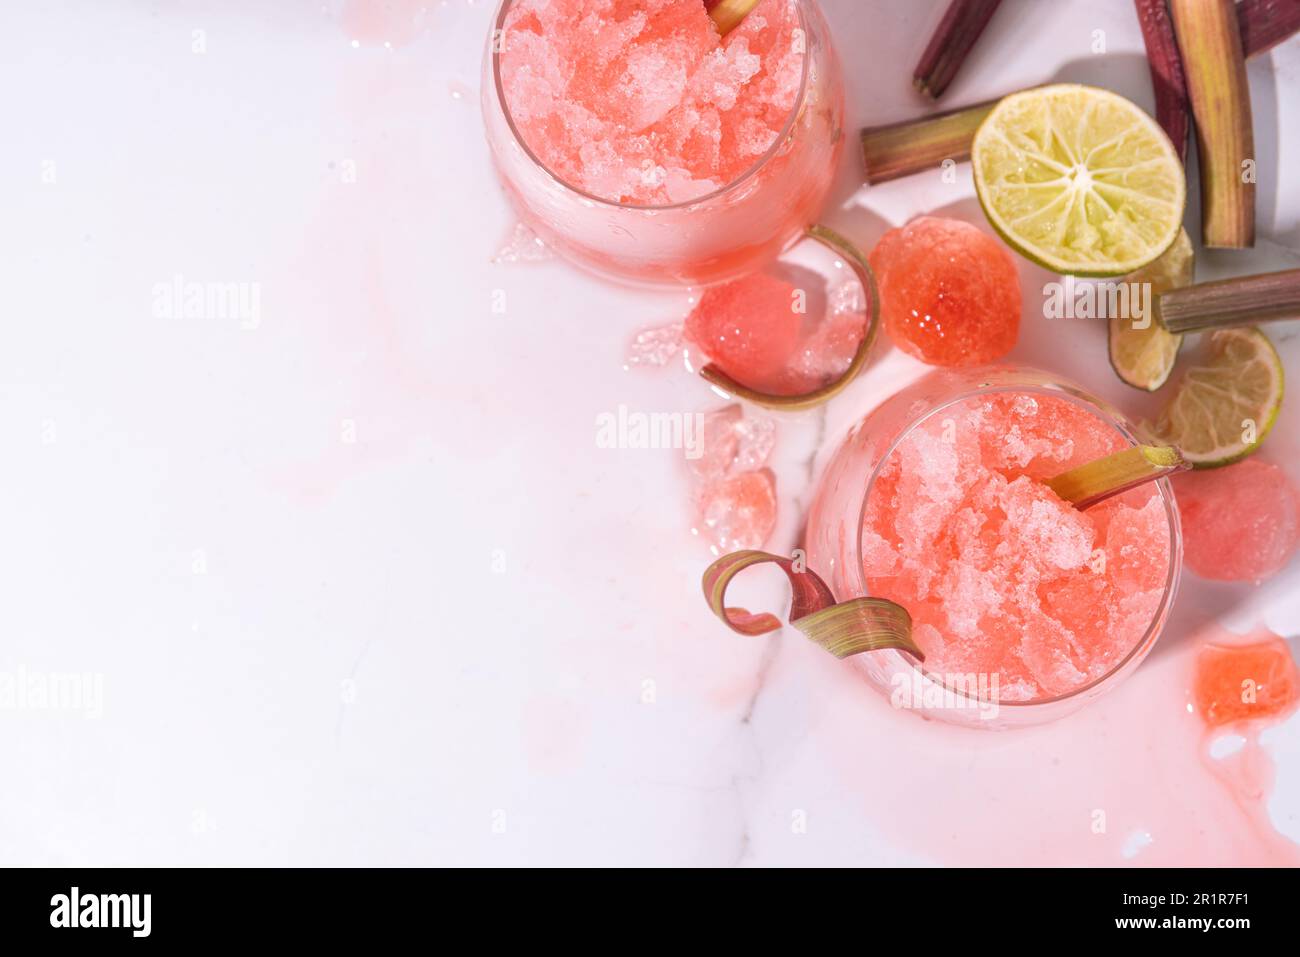 https://c8.alamy.com/comp/2R1R7F1/refreshing-summer-rhubarb-sour-fizz-cocktail-frozen-fizz-cocktail-sweet-rhubarb-slushy-with-sirup-rum-and-champagne-refreshing-cold-and-healthy-s-2R1R7F1.jpg